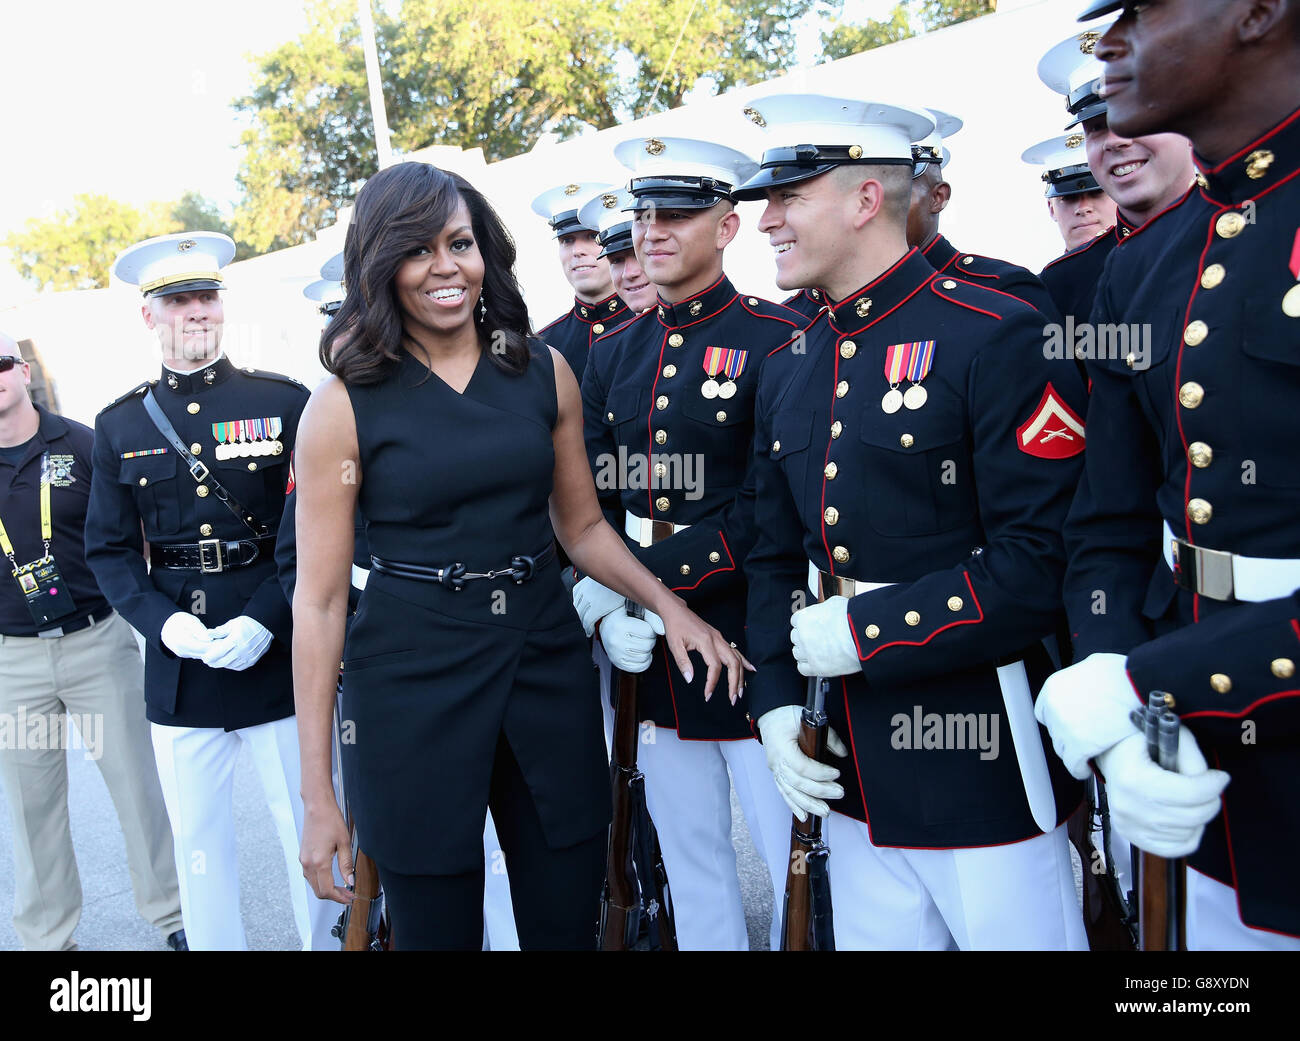 First Lady Michelle Obama meets the US Marine Corps Silent Drill Platoon ahead of the Opening Ceremony of the Invictus Games Orlando 2016 at ESPN Wide World of Sports in Orlando, Florida. Stock Photo